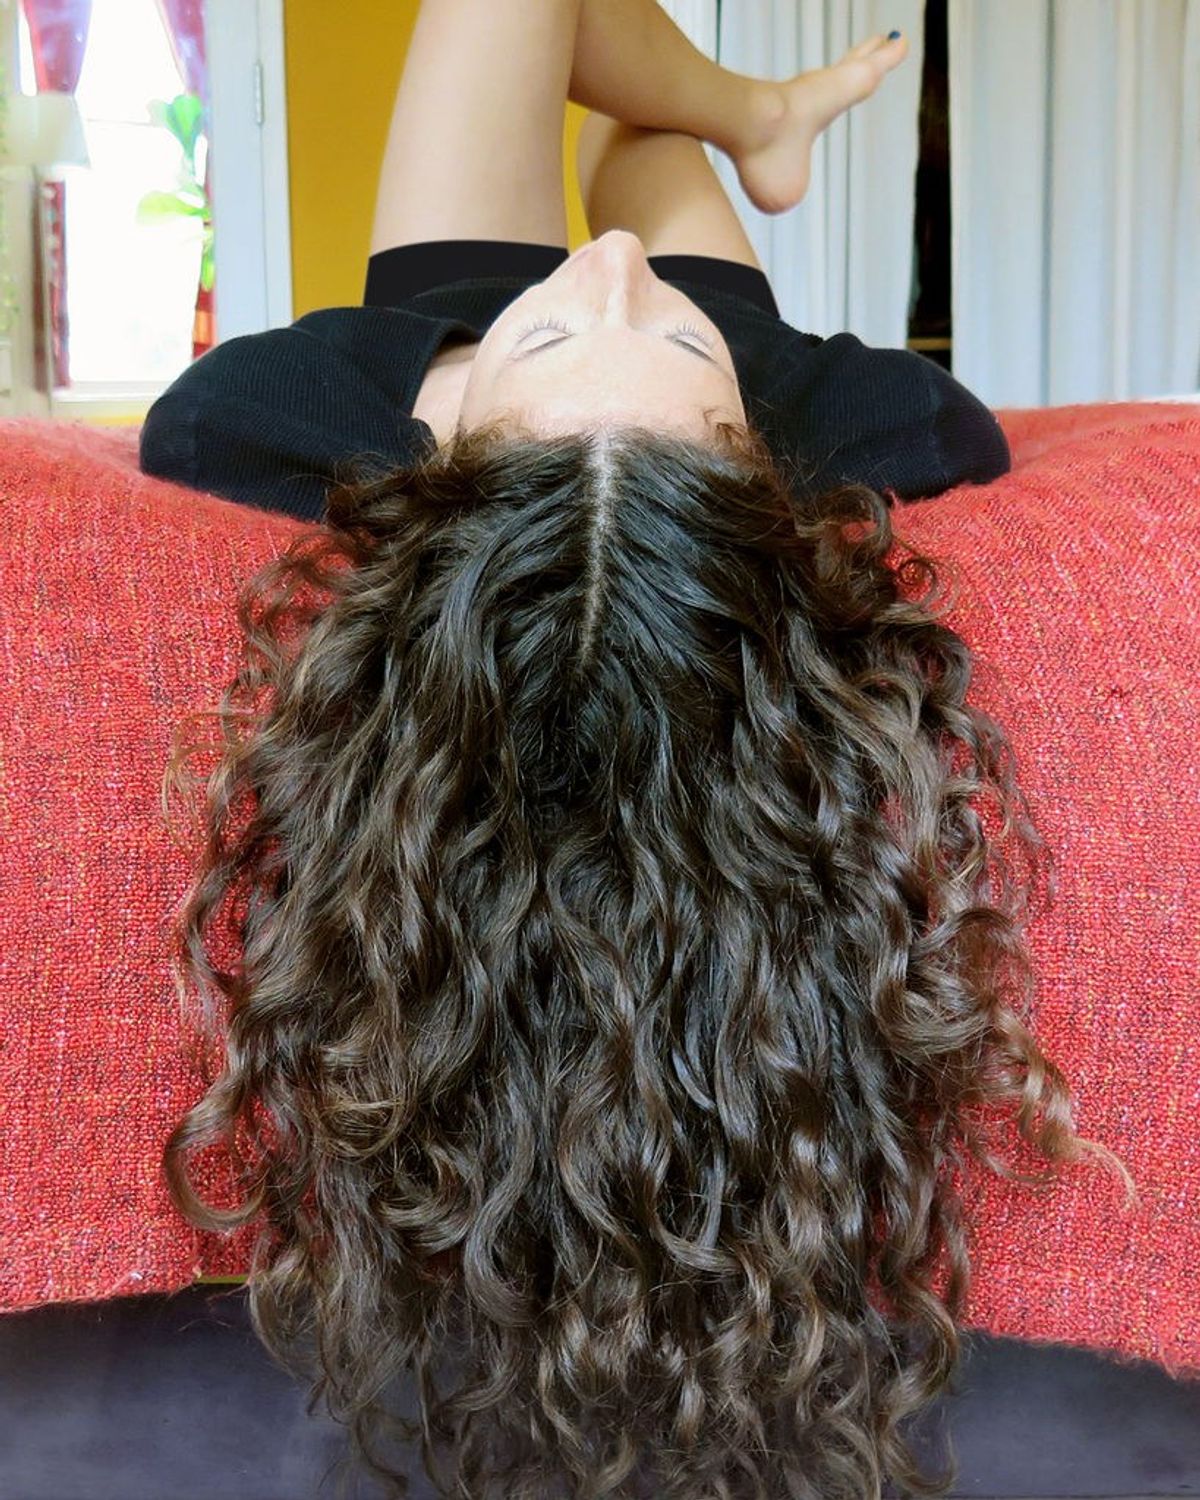 25 Struggles Of Curly Hair Girls